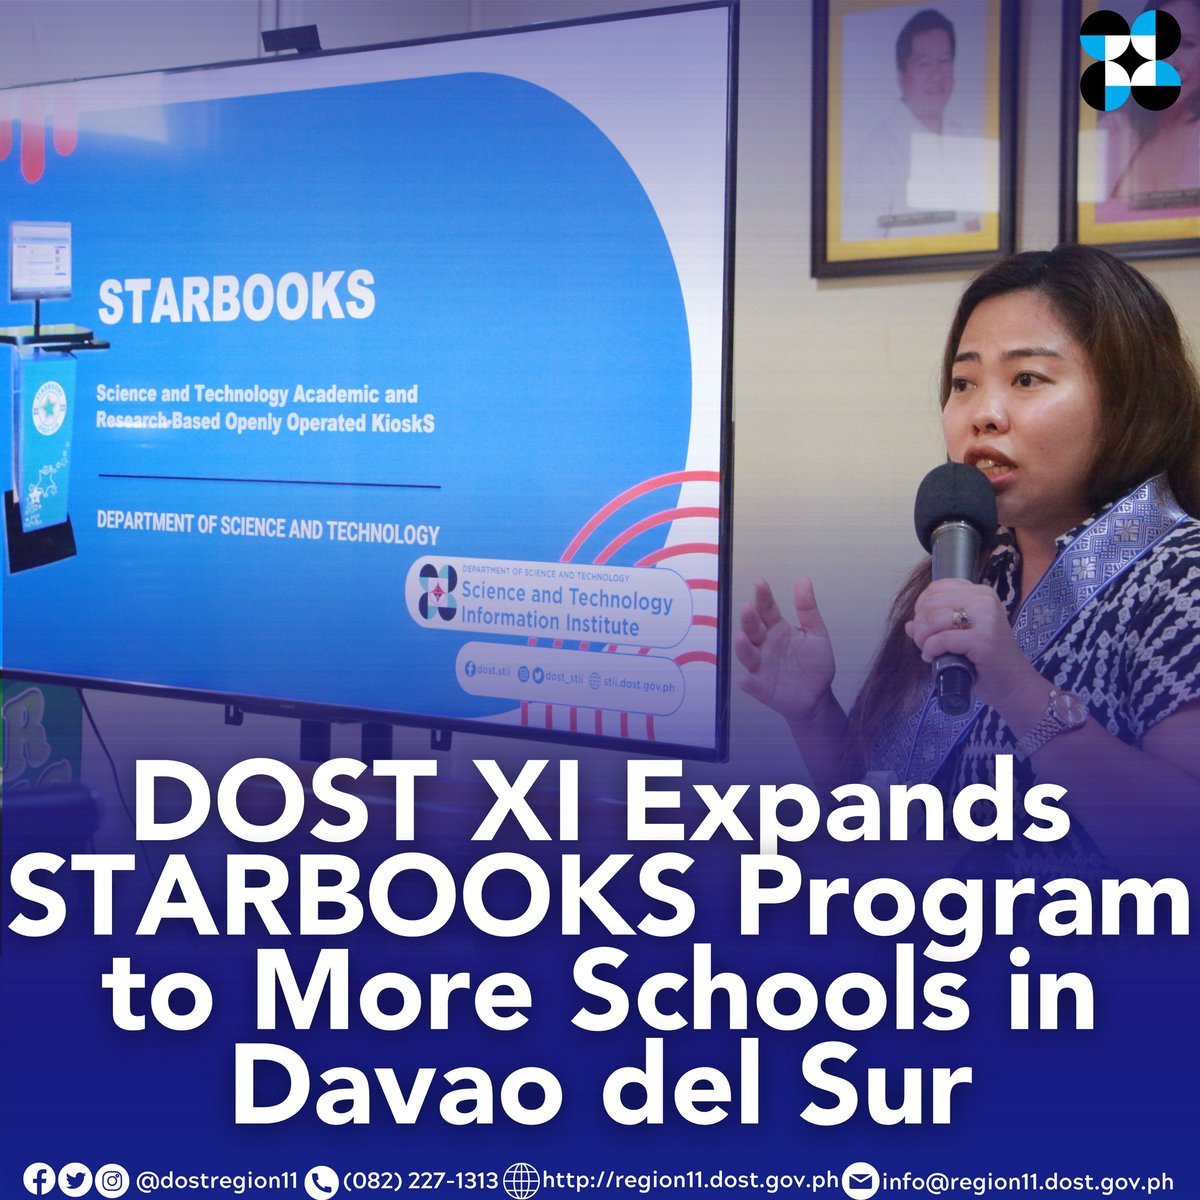 The DOST XI & Provincial S&T Office in Davao del Sur signed a Memorandum of Understanding (MOU) with Davao del Sur State College-Digos Campus & Balnate Elementary School in Magsaysay, Davao del Sur to deploy STARBOOKS.
Read the full story here: bit.ly/3U95auD
#STARBOOKS